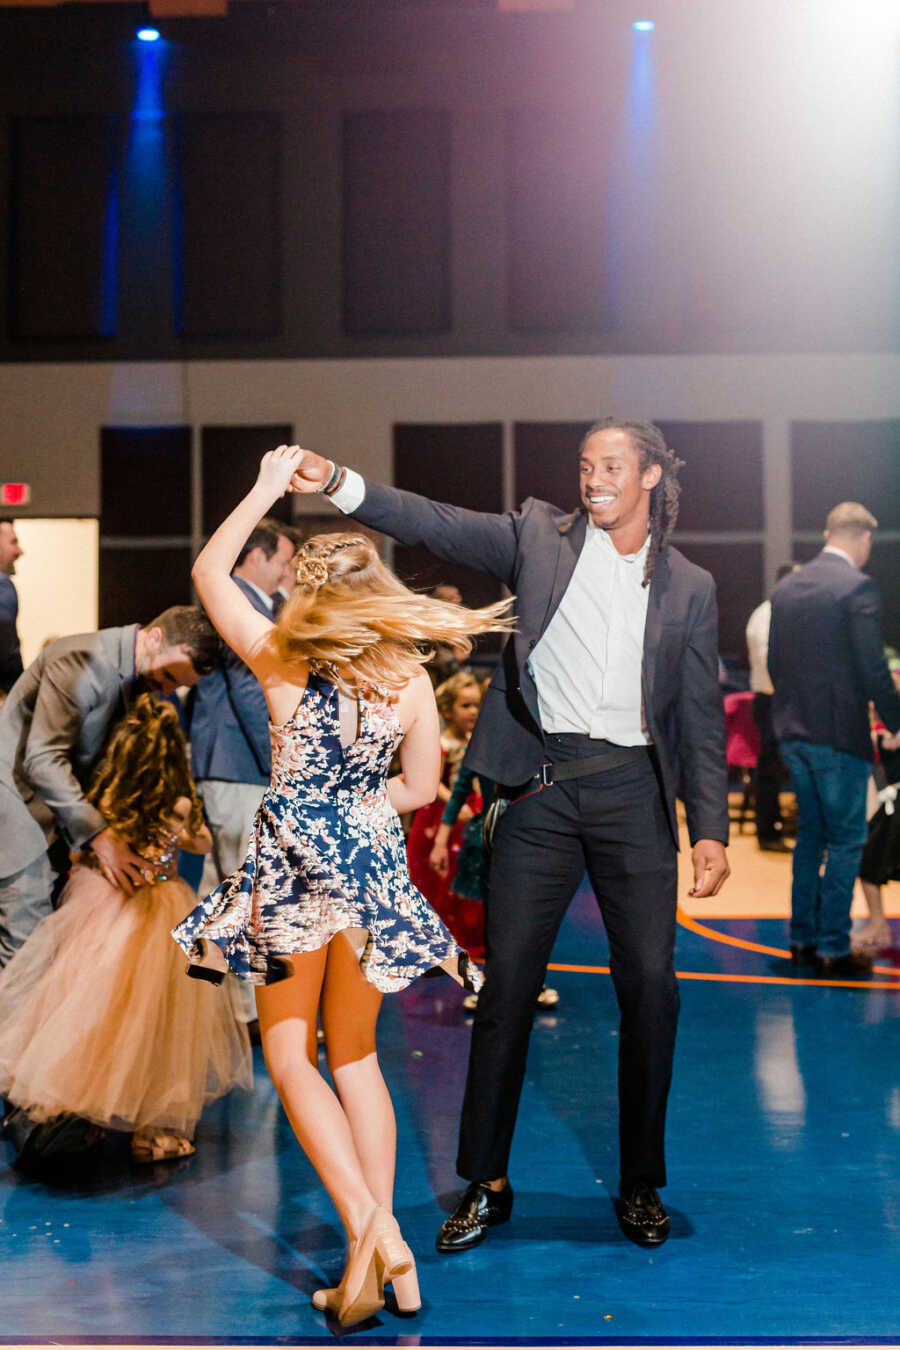 girl being twirled by her date